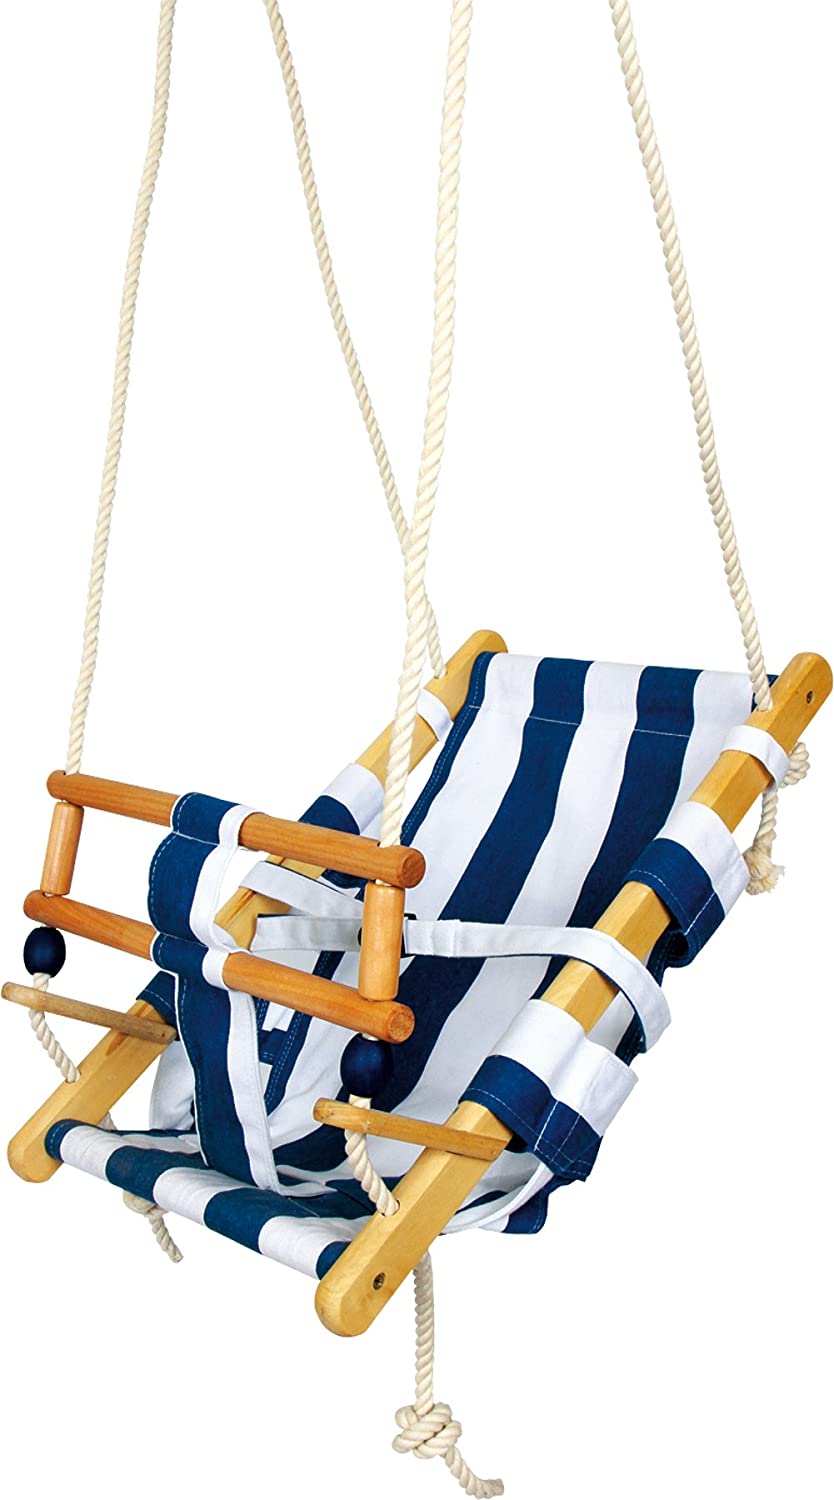 Small Foot Maritime 6996 Childrens Swing Wooden Nautical Style Safe With S